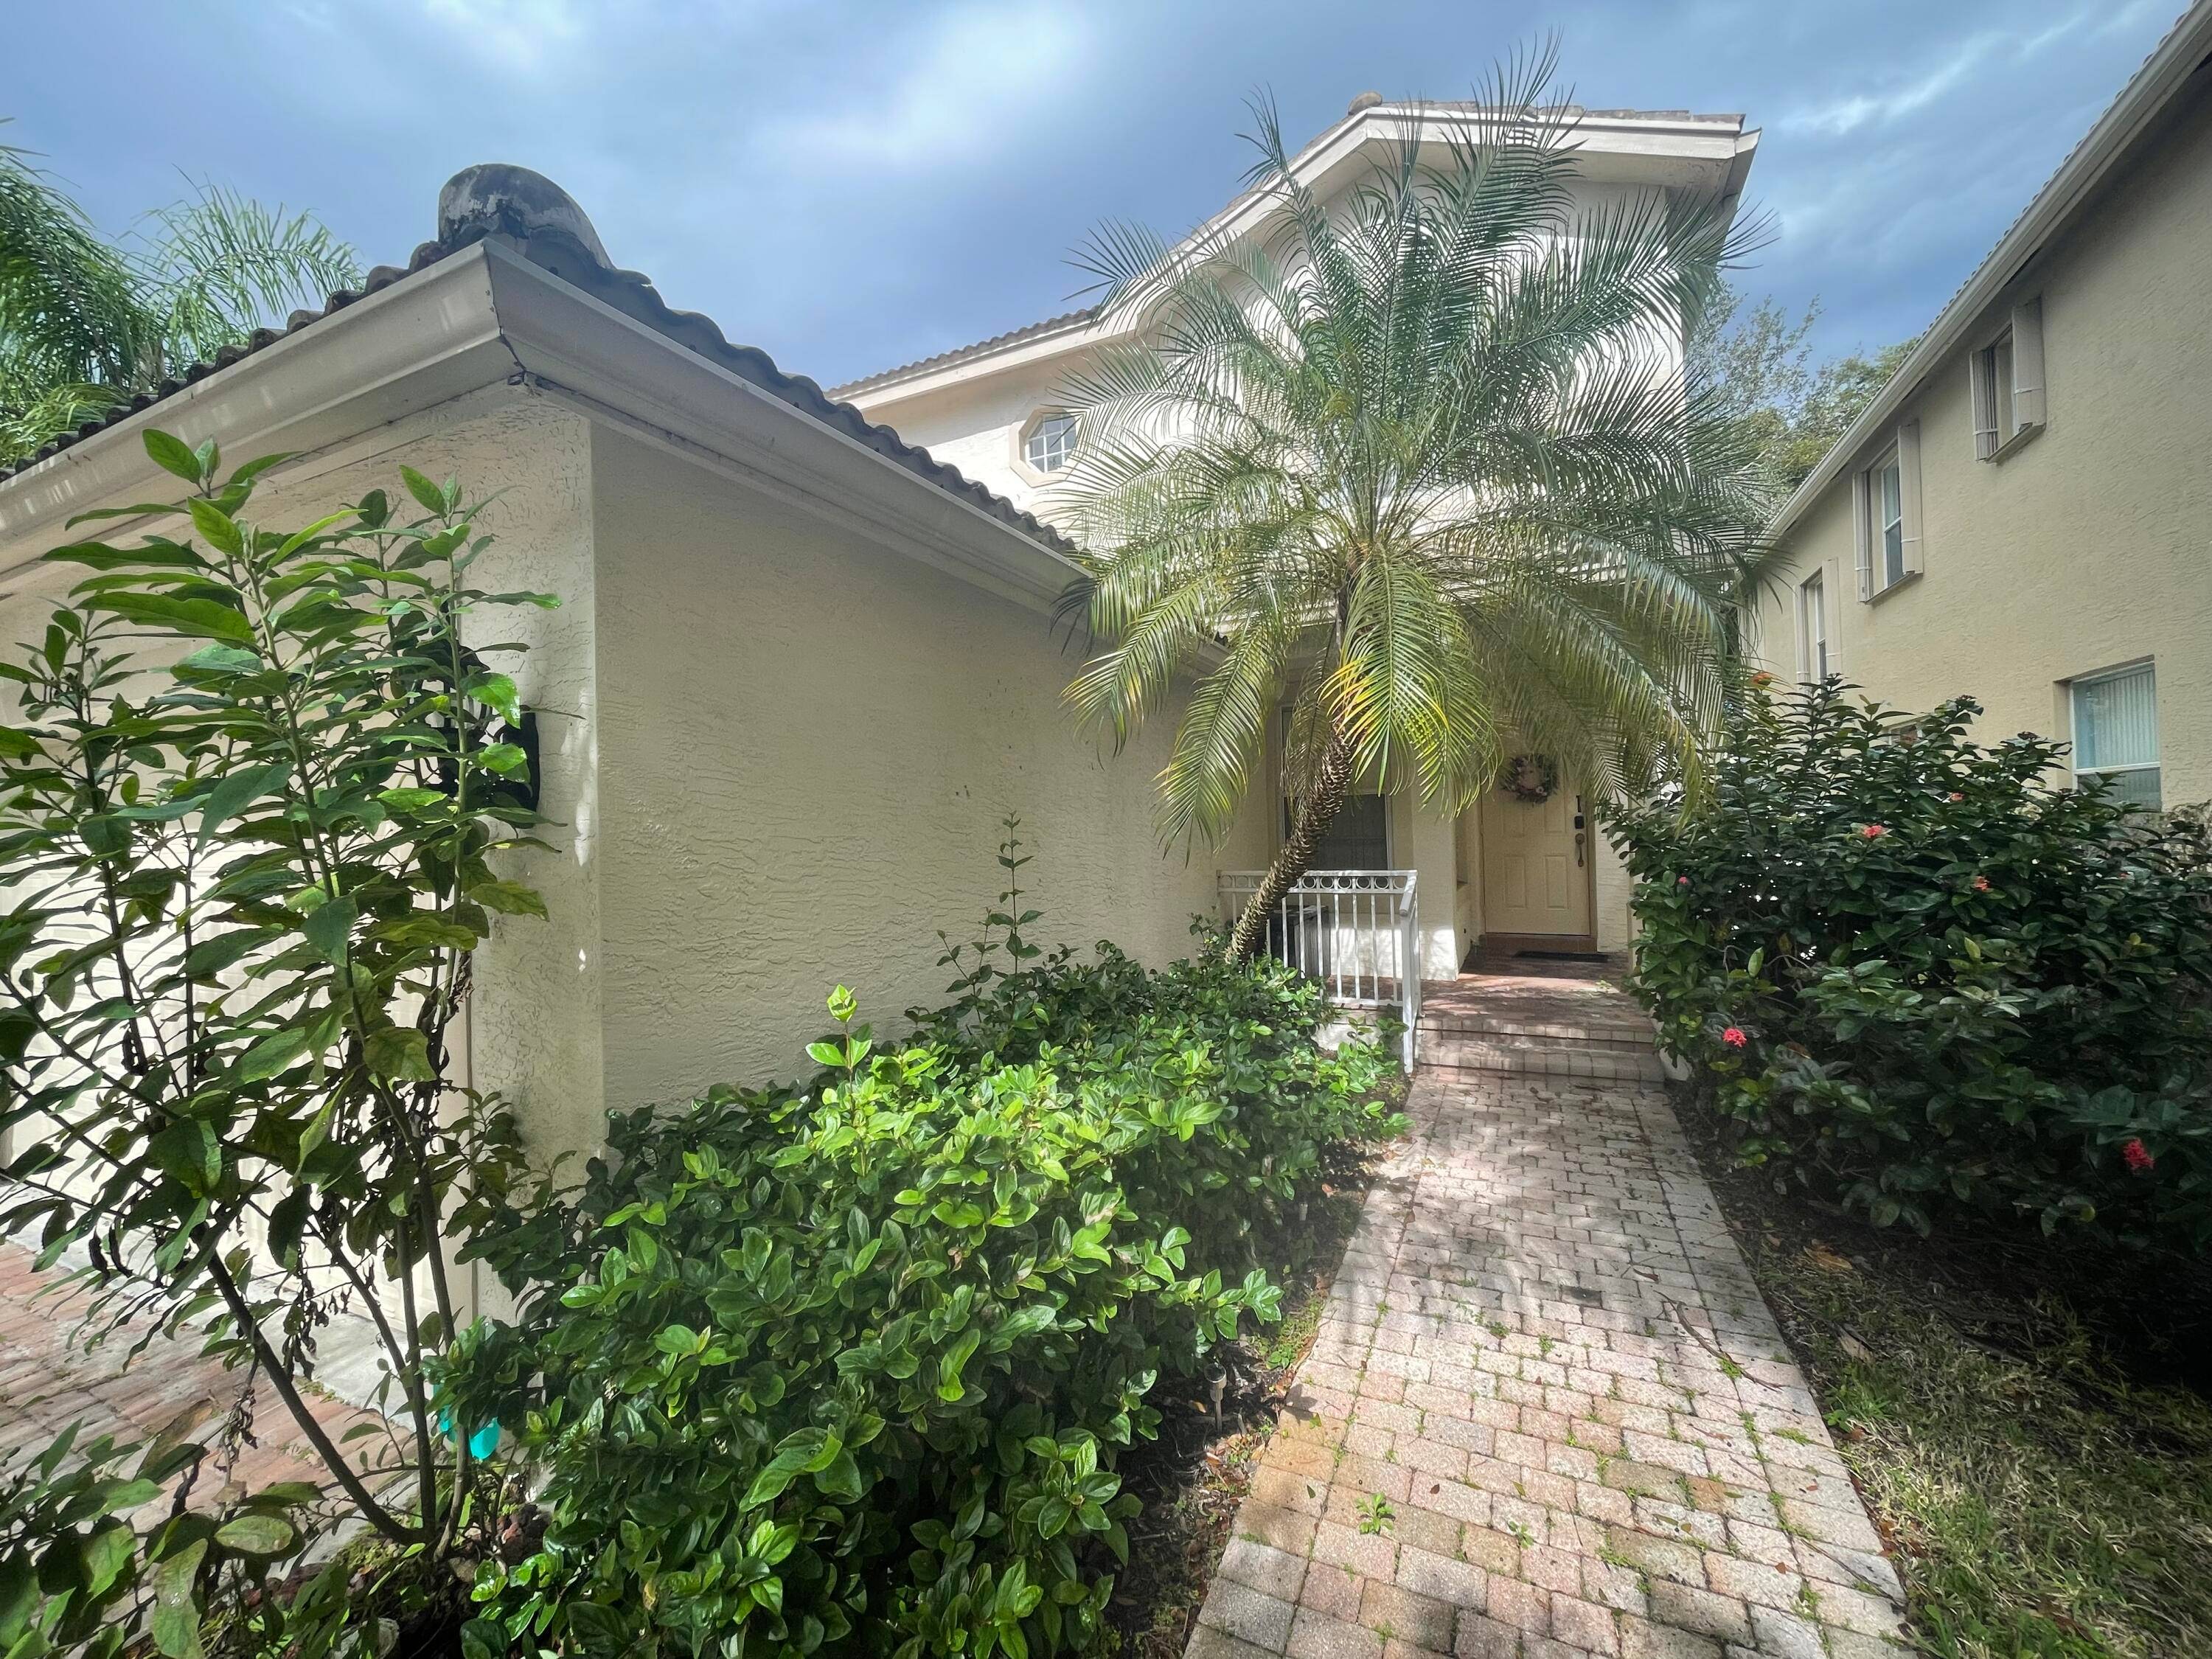 3 bedroom home for sale in gated community of Nautica Lakes in Royal Palm Beach, FL.